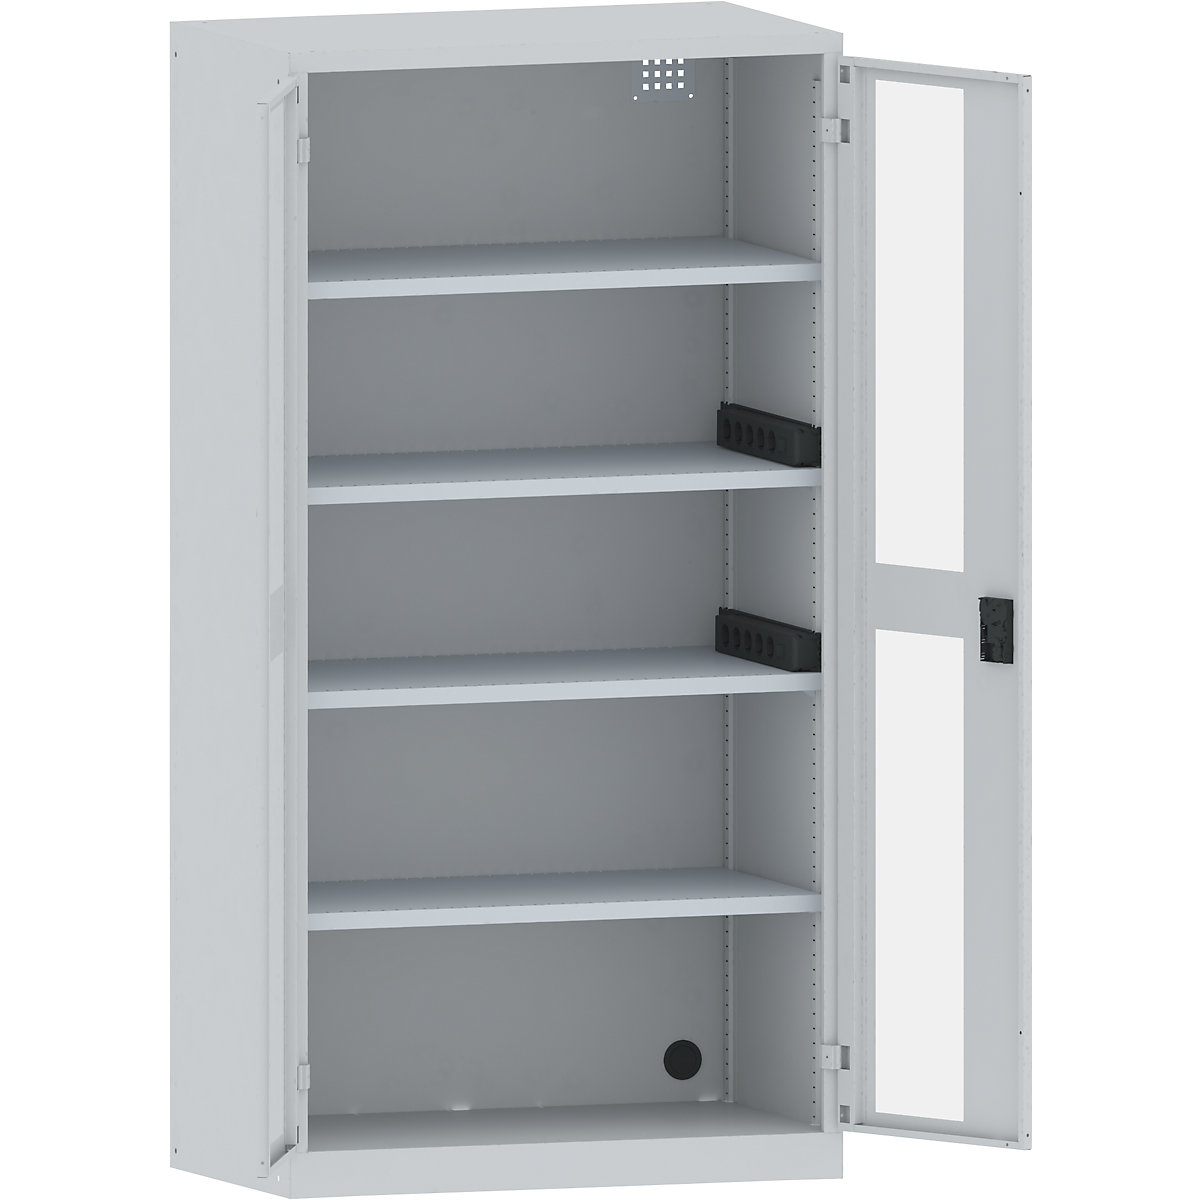 Battery charging cabinet – LISTA, 4 shelves, vision panel doors, 2 power strips at side, grey-9